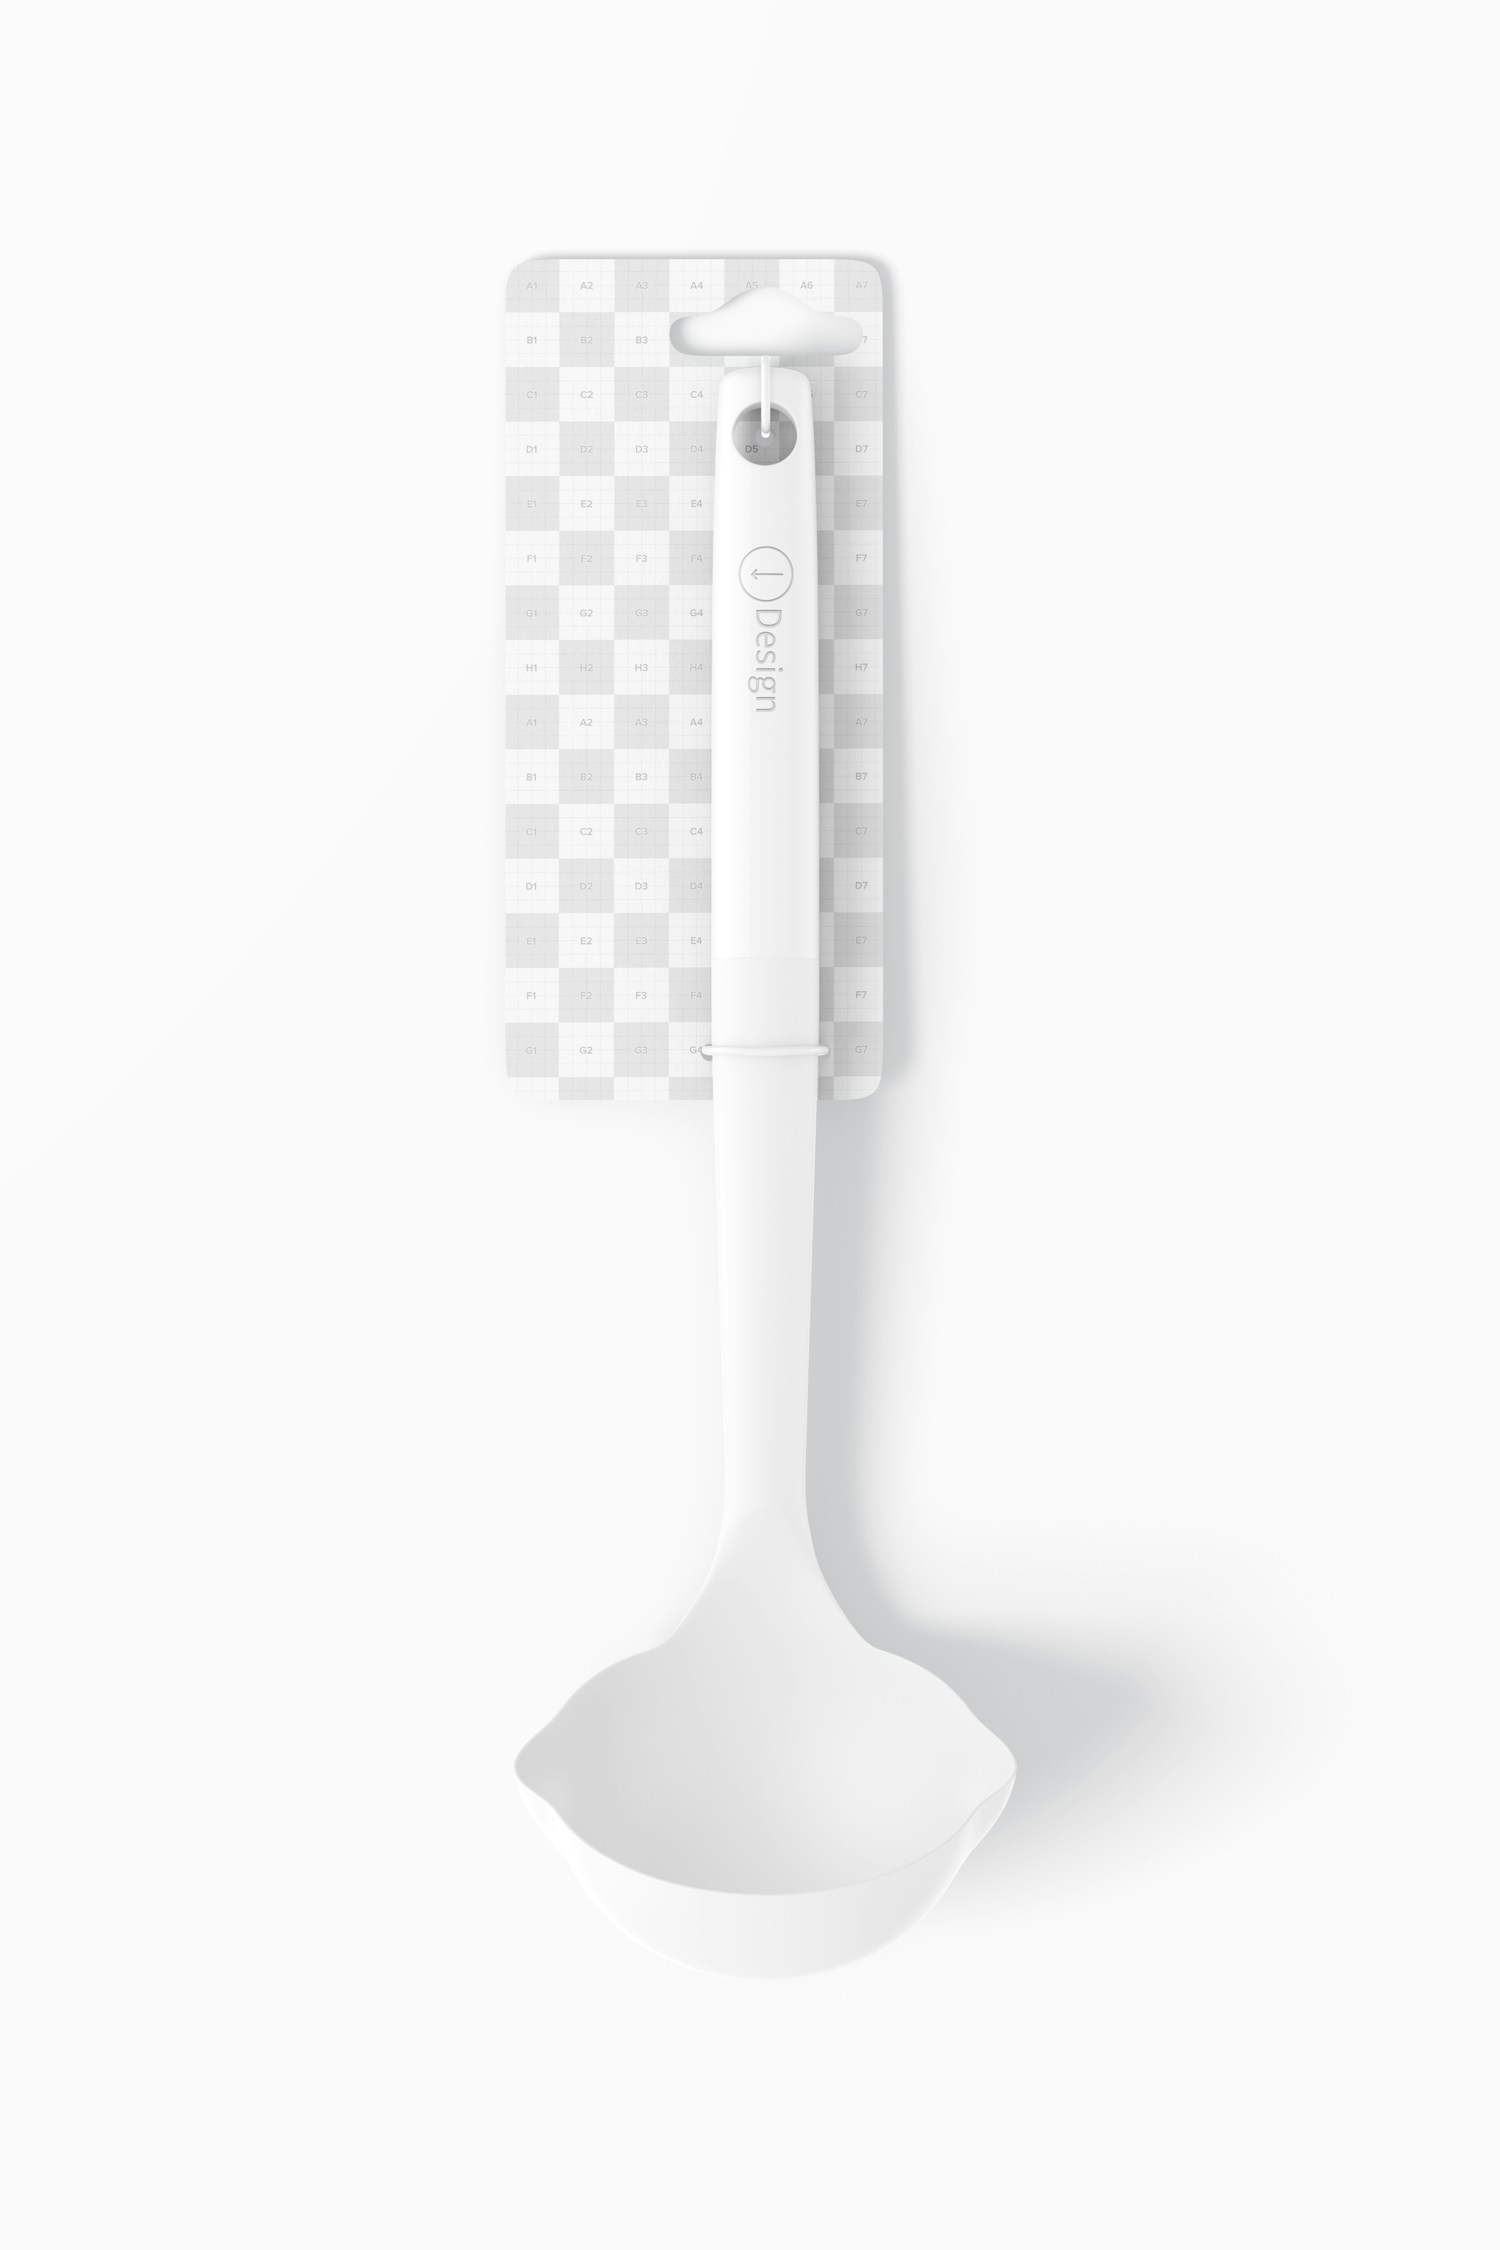 Soup Spoon Mockup, Front View